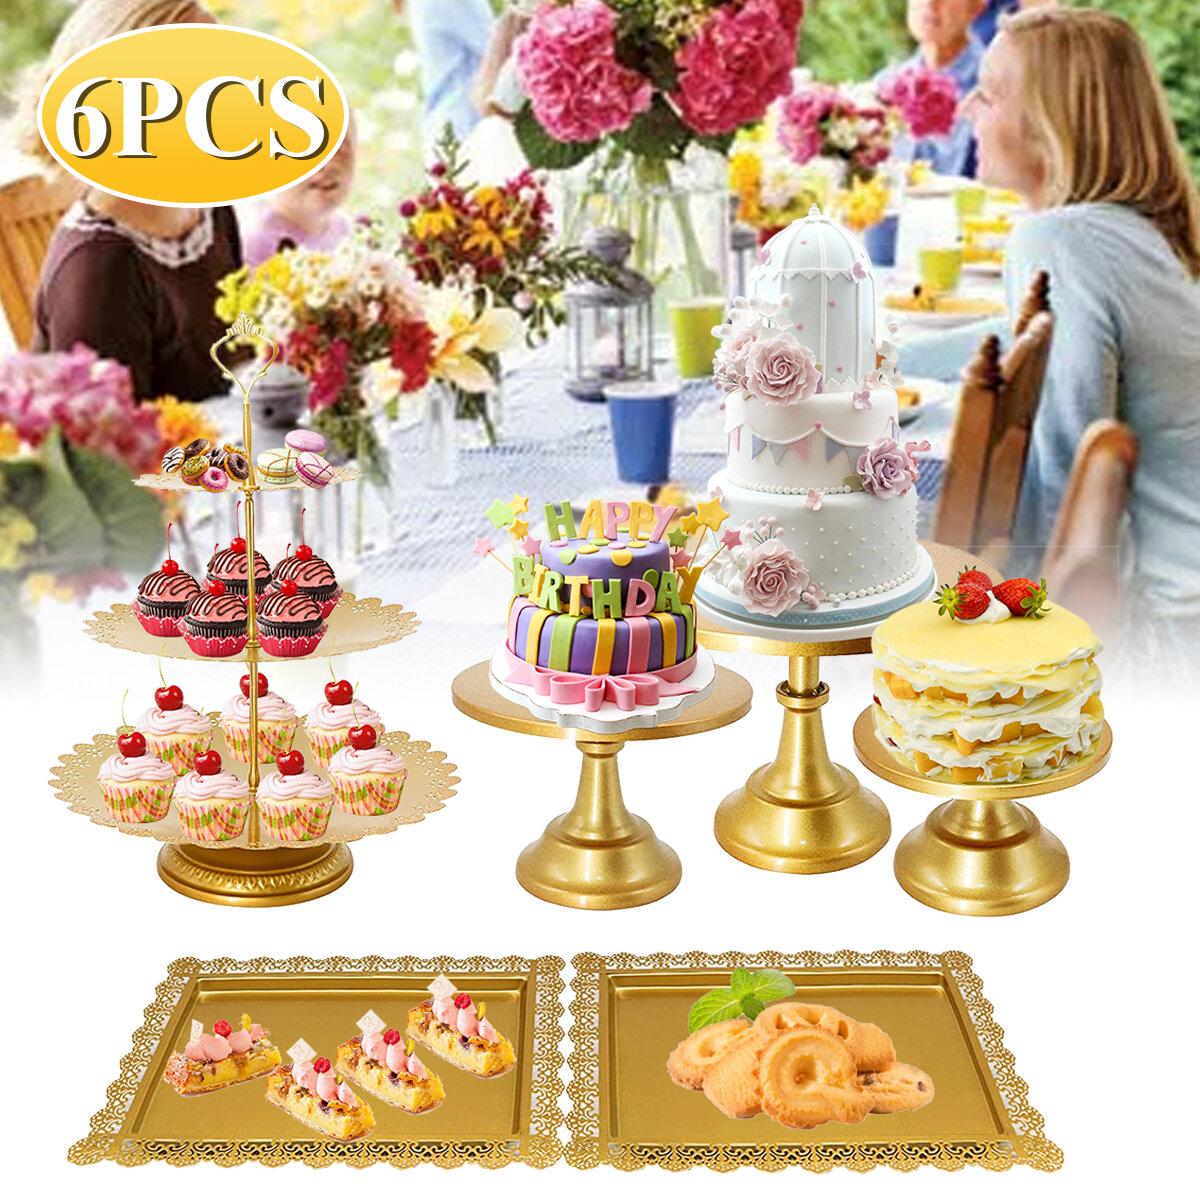 Multifunctional Gold Wrought Iron Cake Stand Washable Reusable Cookies Cupcake Dessert Holder For Wedding Birthday Parti